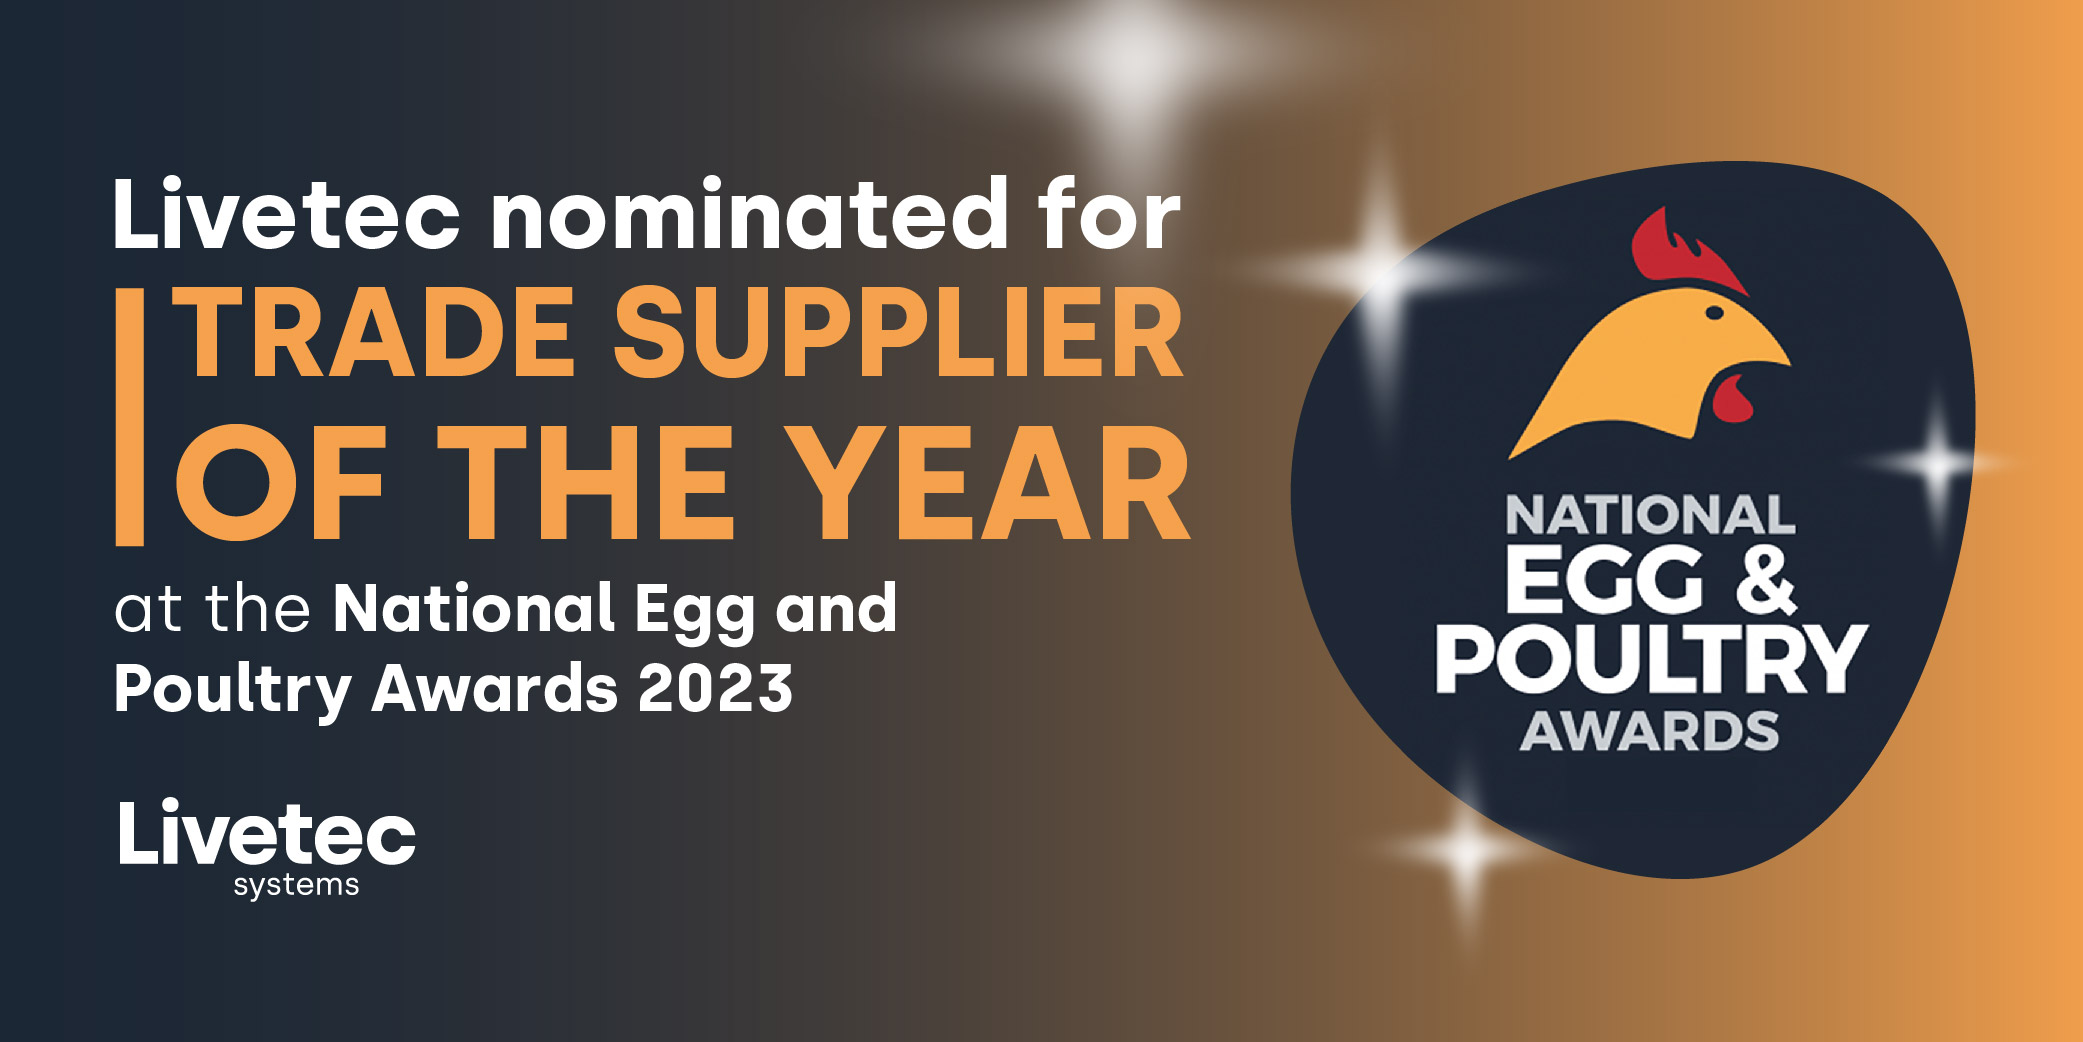 Livetec Systems nominated Trade Supplier of the Year at the 2023 National Egg & Poultry Awards!